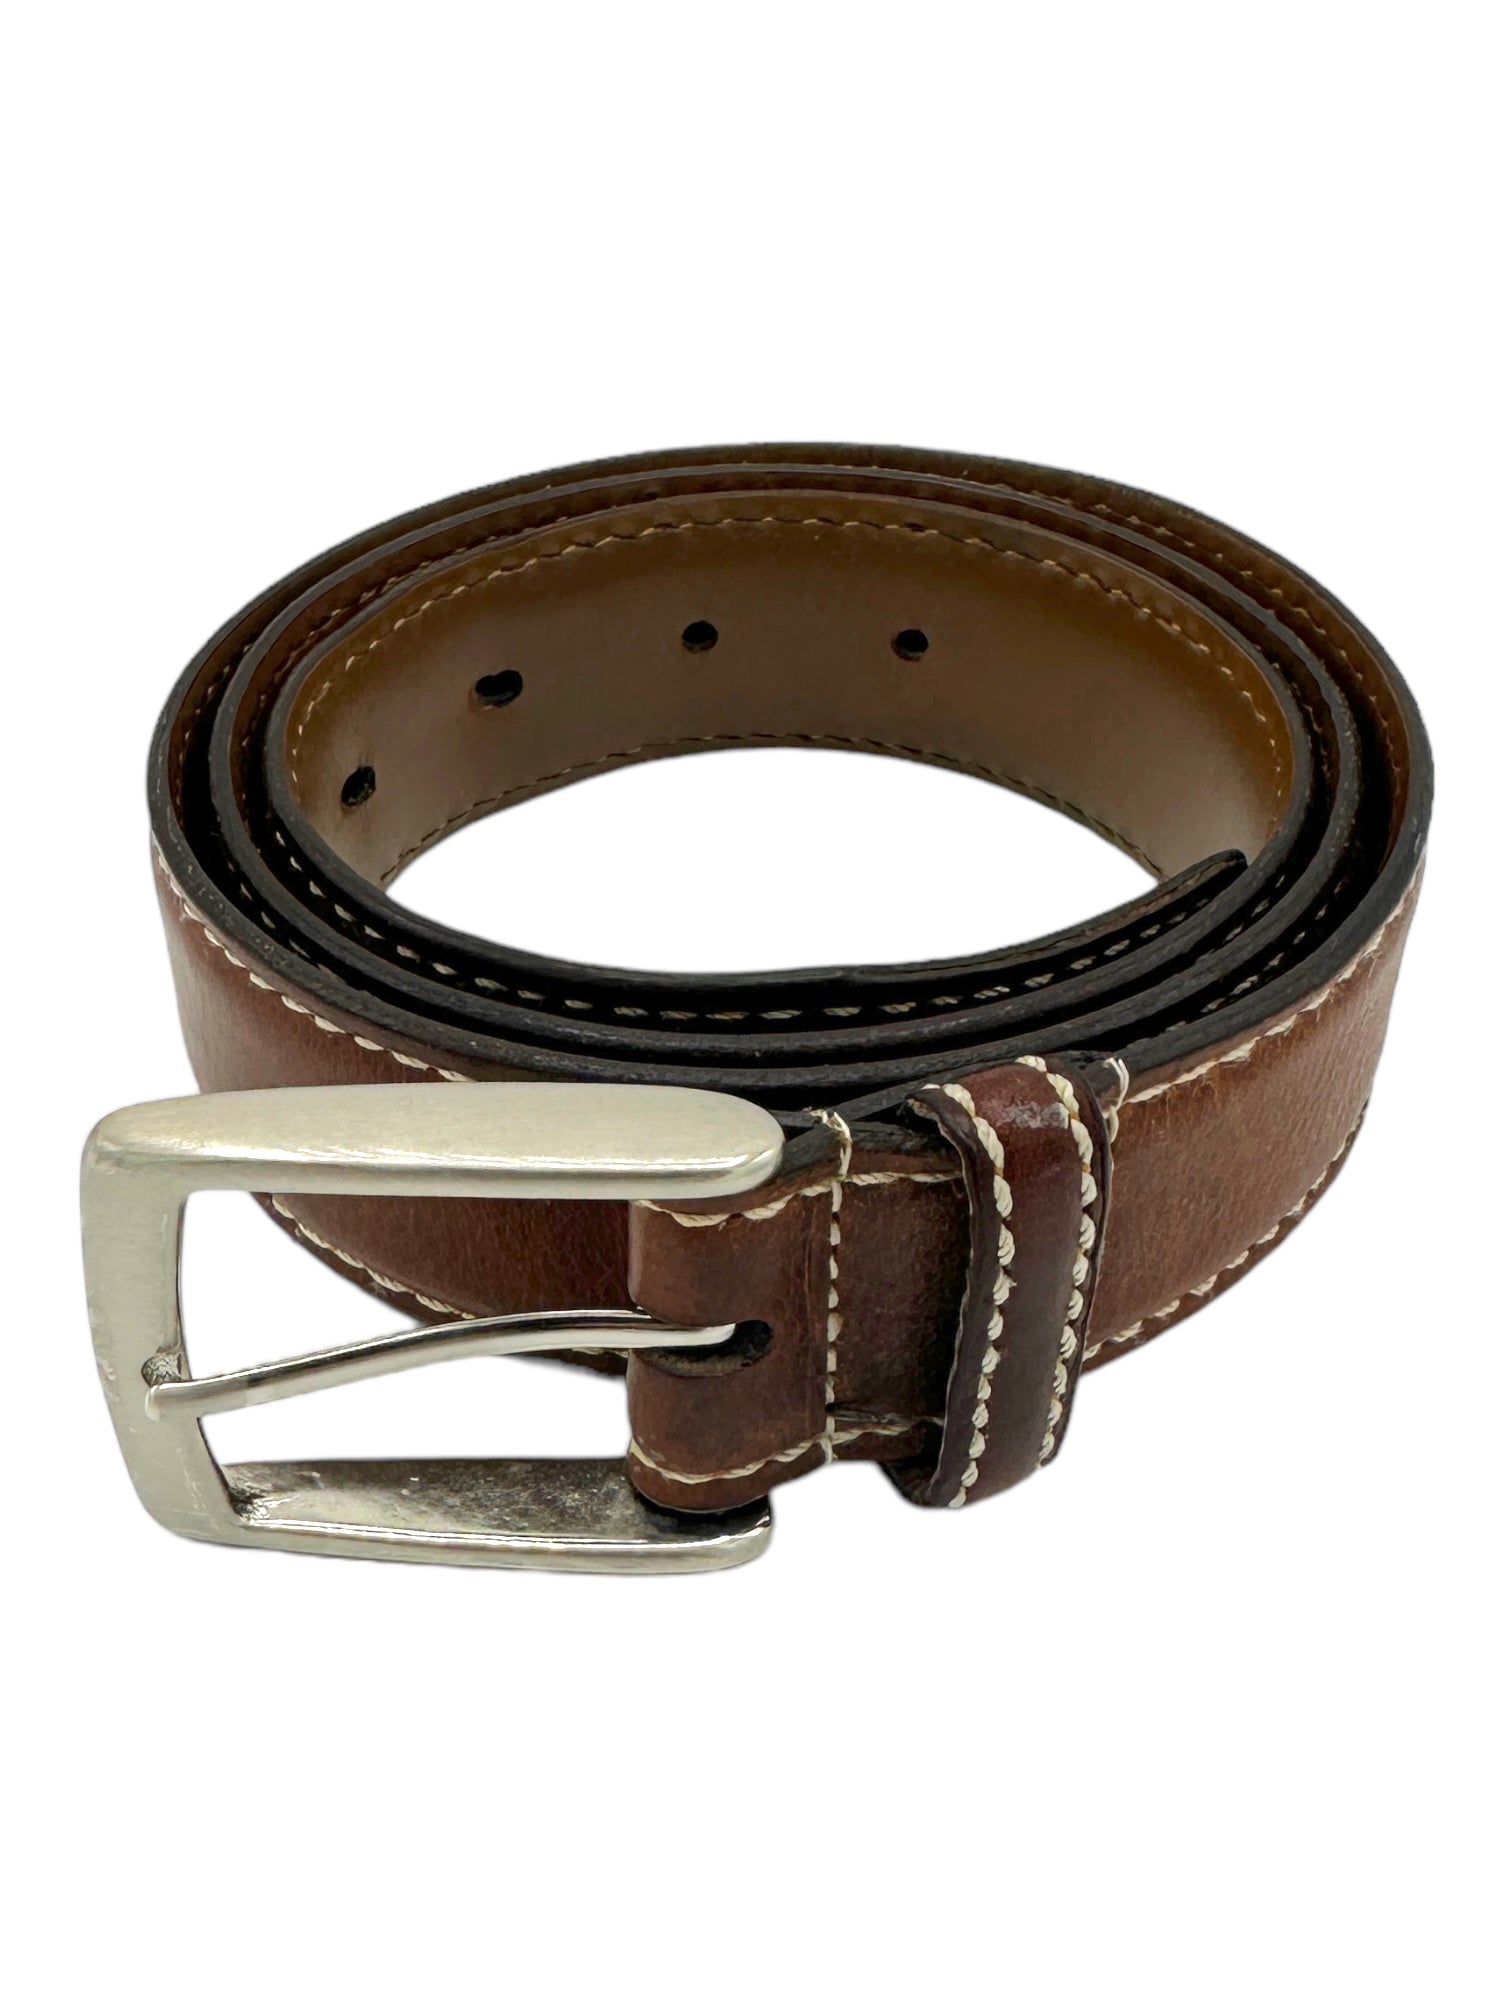 Allen Edmonds Light Brown Leather Belt - Genuine Design luxury consignment Calgary, Alberta, Canada New and pre-owned clothing, shoes, accessories.